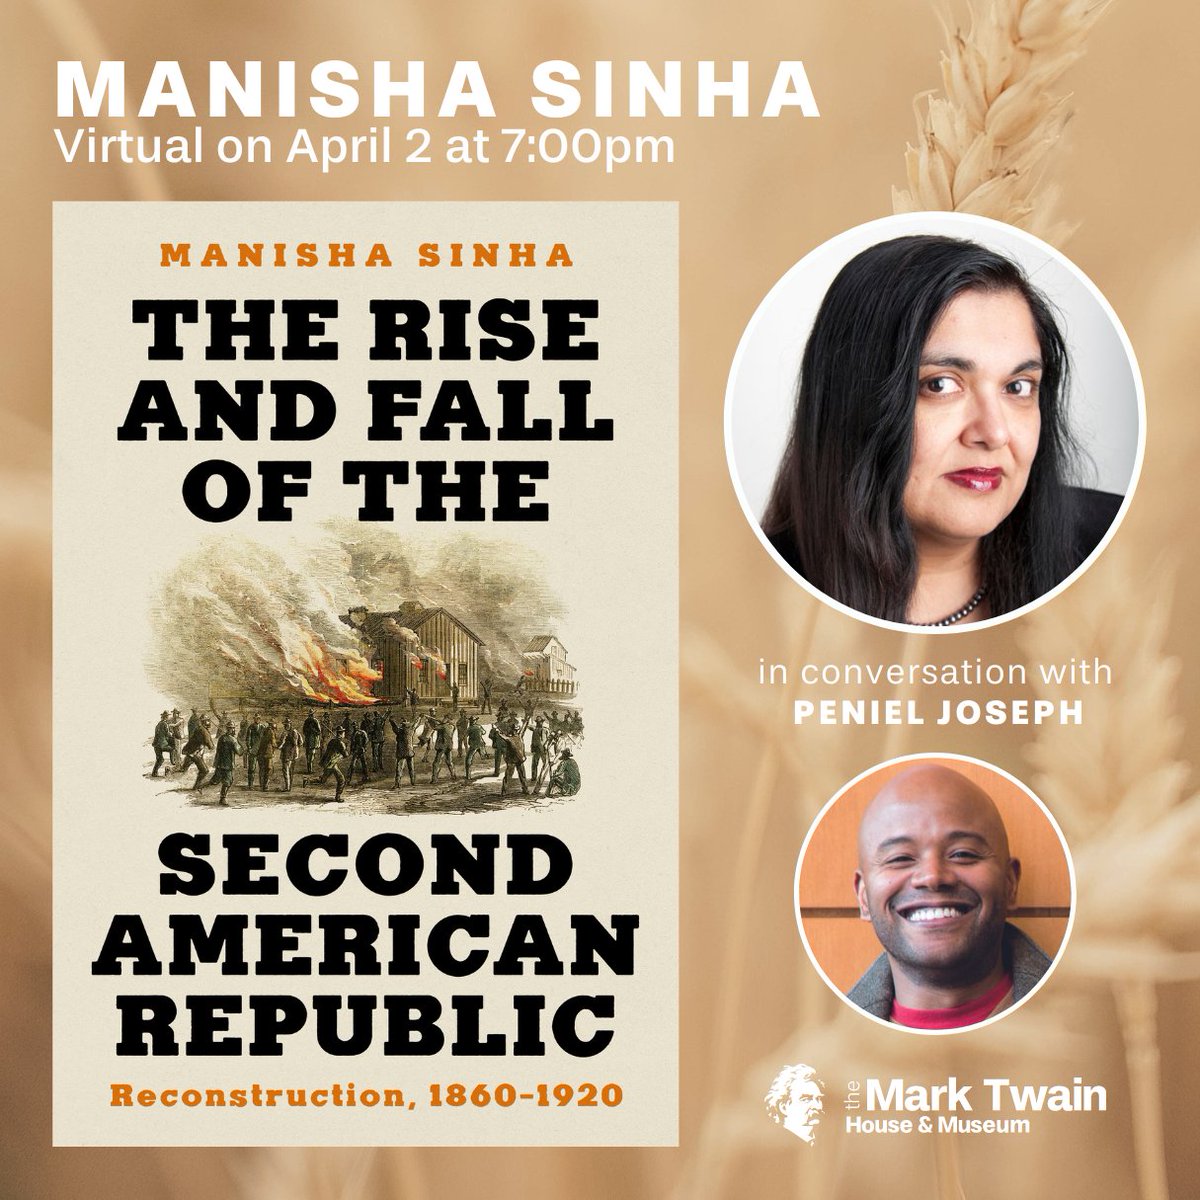 Tuesday, April 2 at 7:00pm ET - THE RISE AND FALL OF THE SECOND AMERICAN REPUBLIC with author @ProfMSinha and @PenielJoseph (Virtual) Choose your own price for non-members. Free for members. Learn more & REGISTER HERE: marktwainhouse.org/event/the-rise…